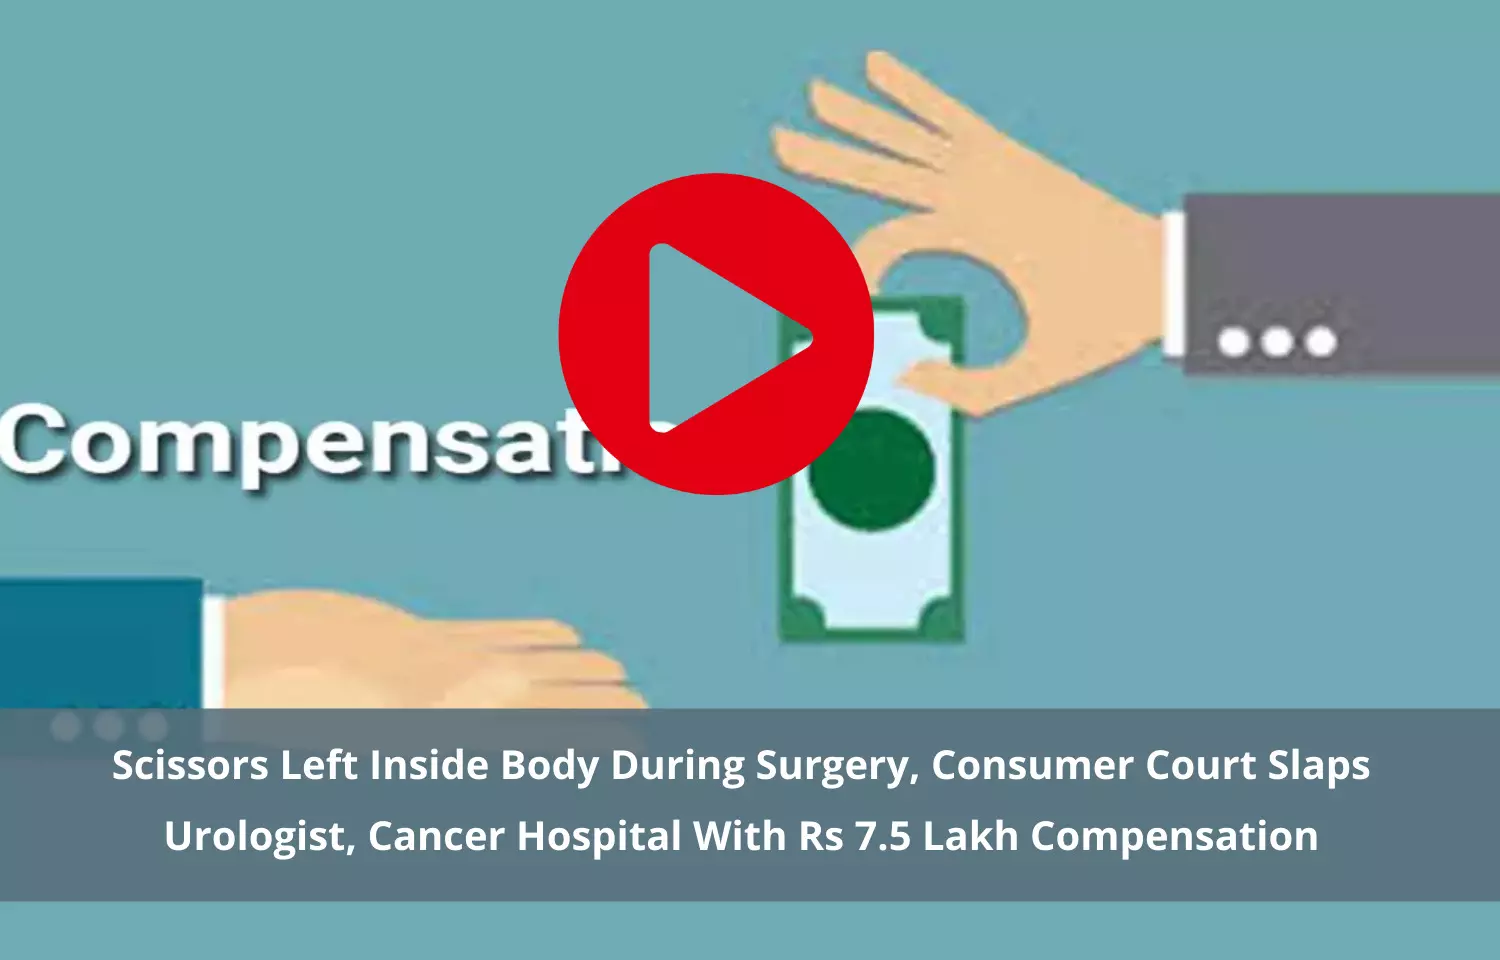 Urologist, Cancer hospital directed to pay Rs 7.5 lakh compensation for leaving scissors inside body